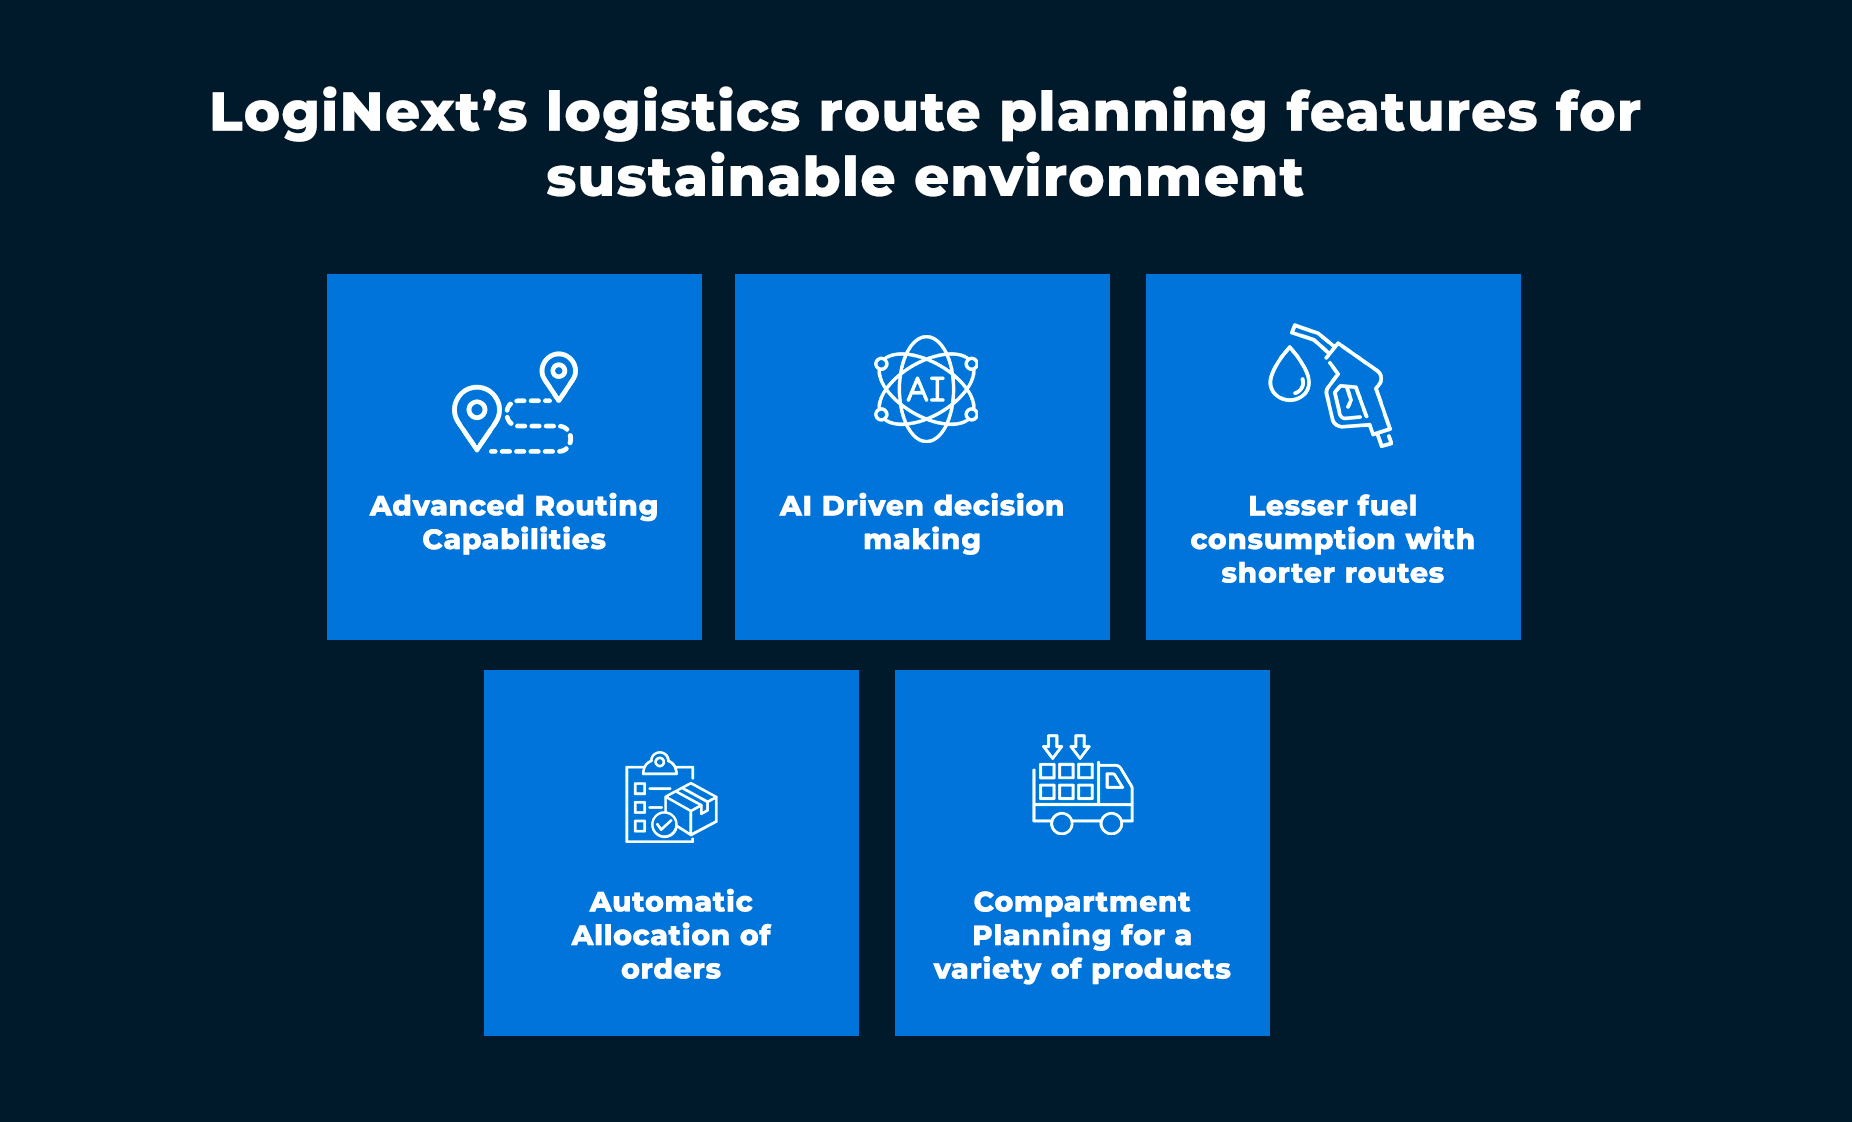 Features offered by LogiNext for logistics route planning and optimization